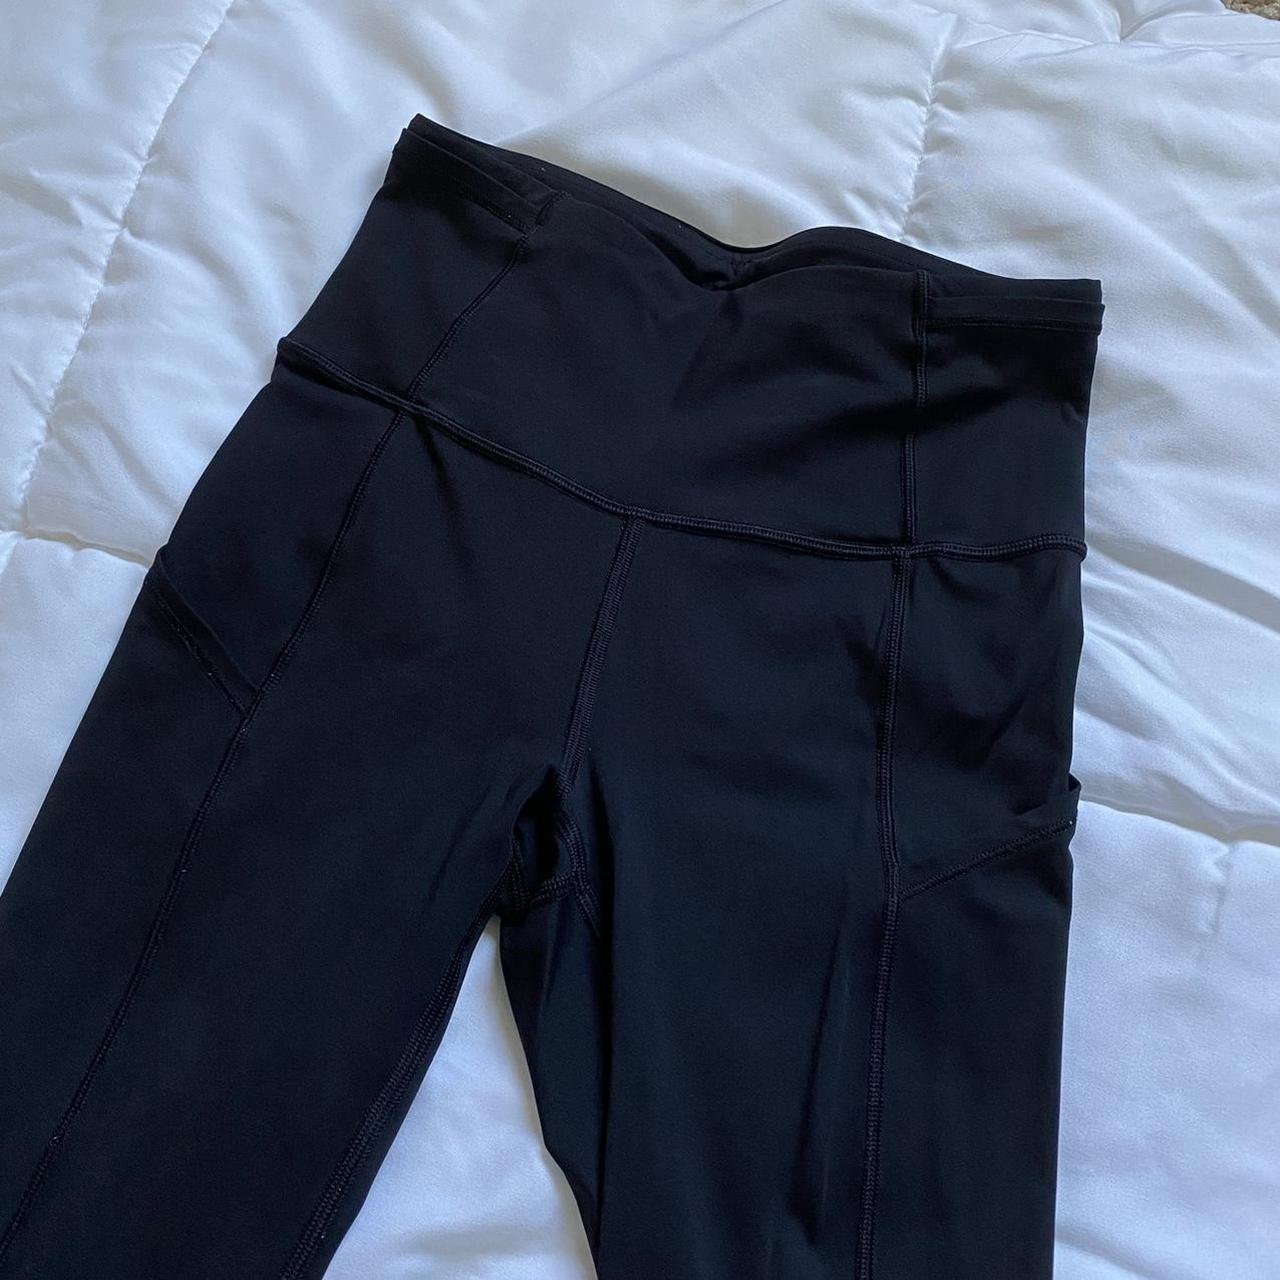 Lululemon fast and free leggings! Only worn twice.